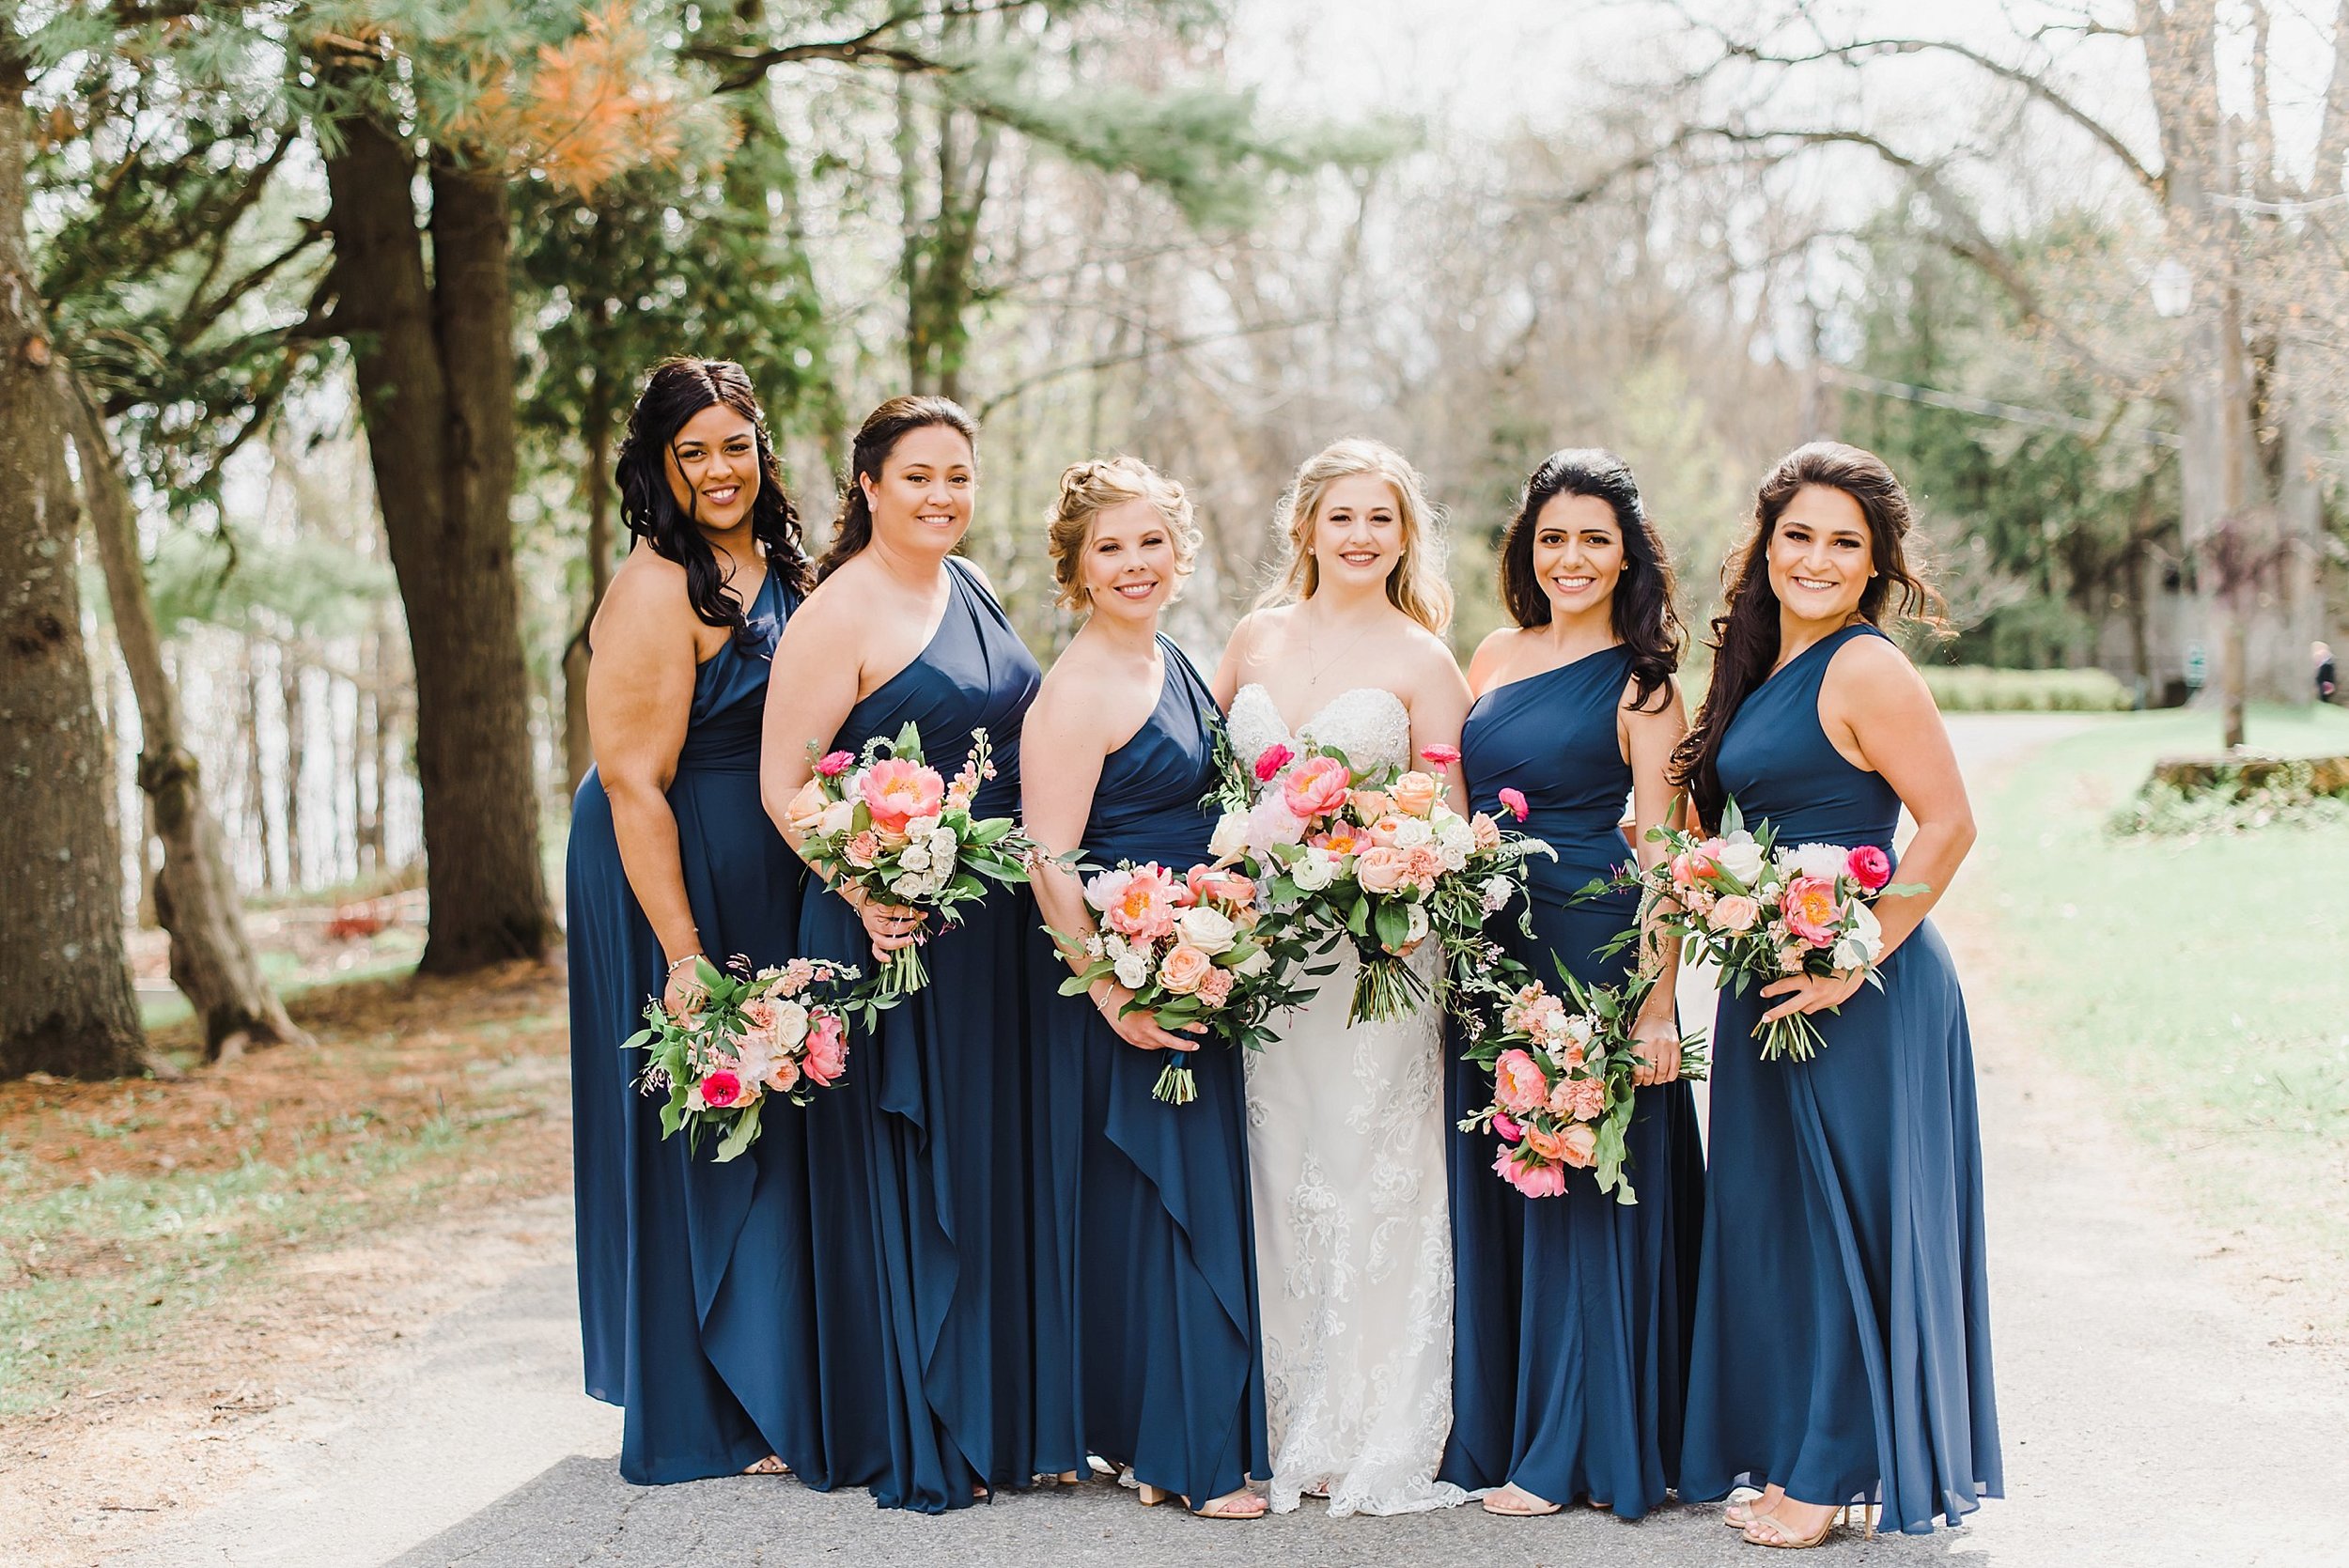  Aren’t these bridesmaids the most beautiful you’ve ever seen!? 